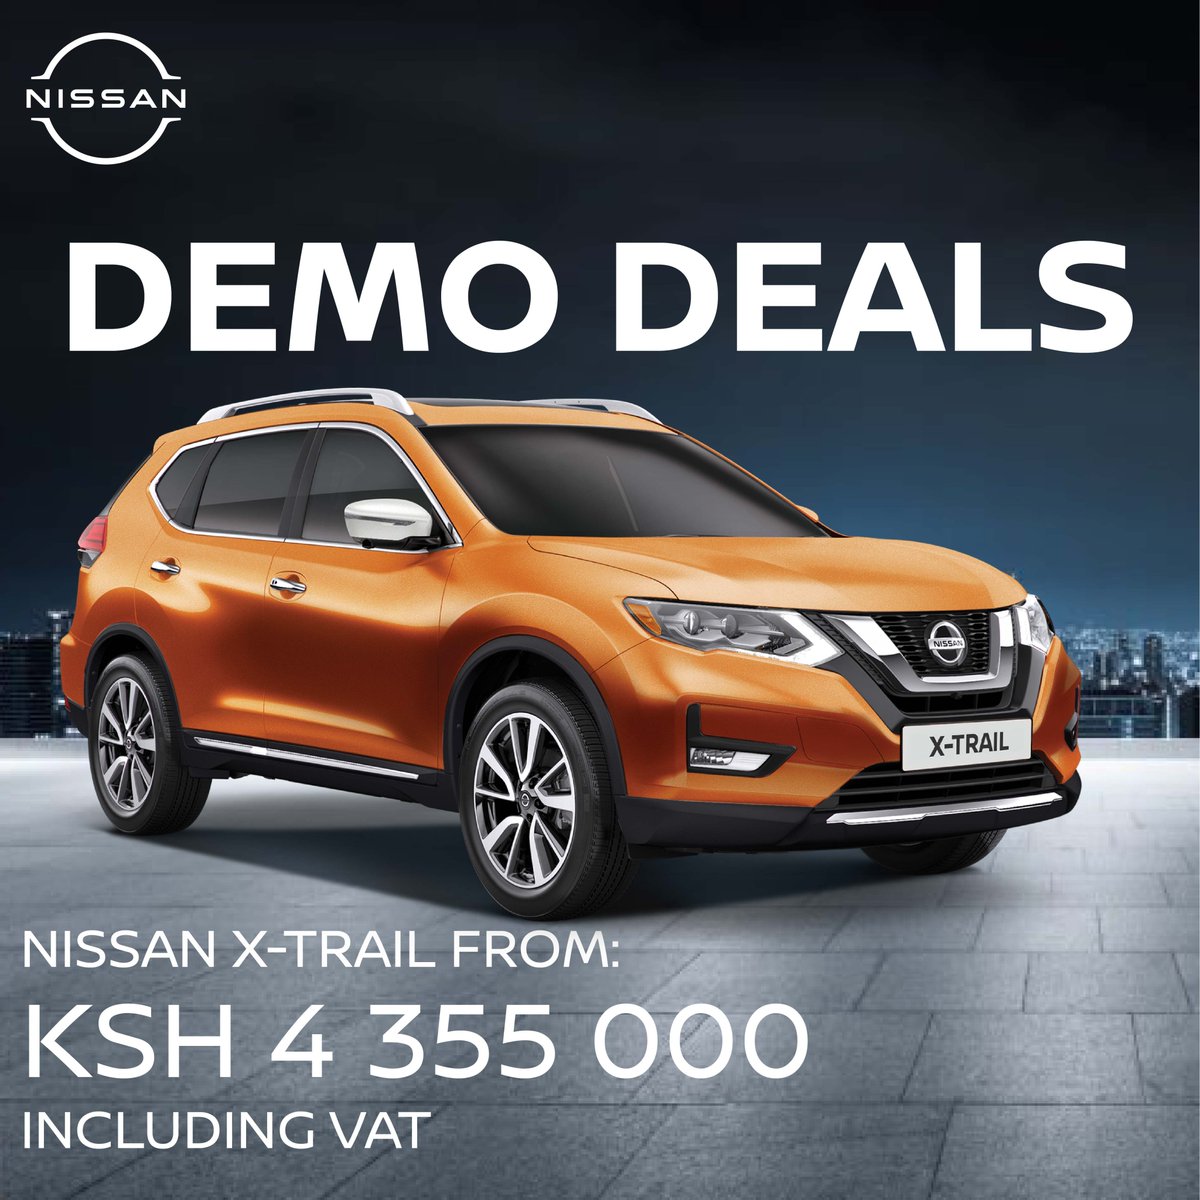 Get our special offers on our Demo Deals this month! Visit Nissan Kenya today or contact us at +254 736 407 533, info@crownmotors.co.ke or crownmotors.co.ke/nissan/ #NissanKenya